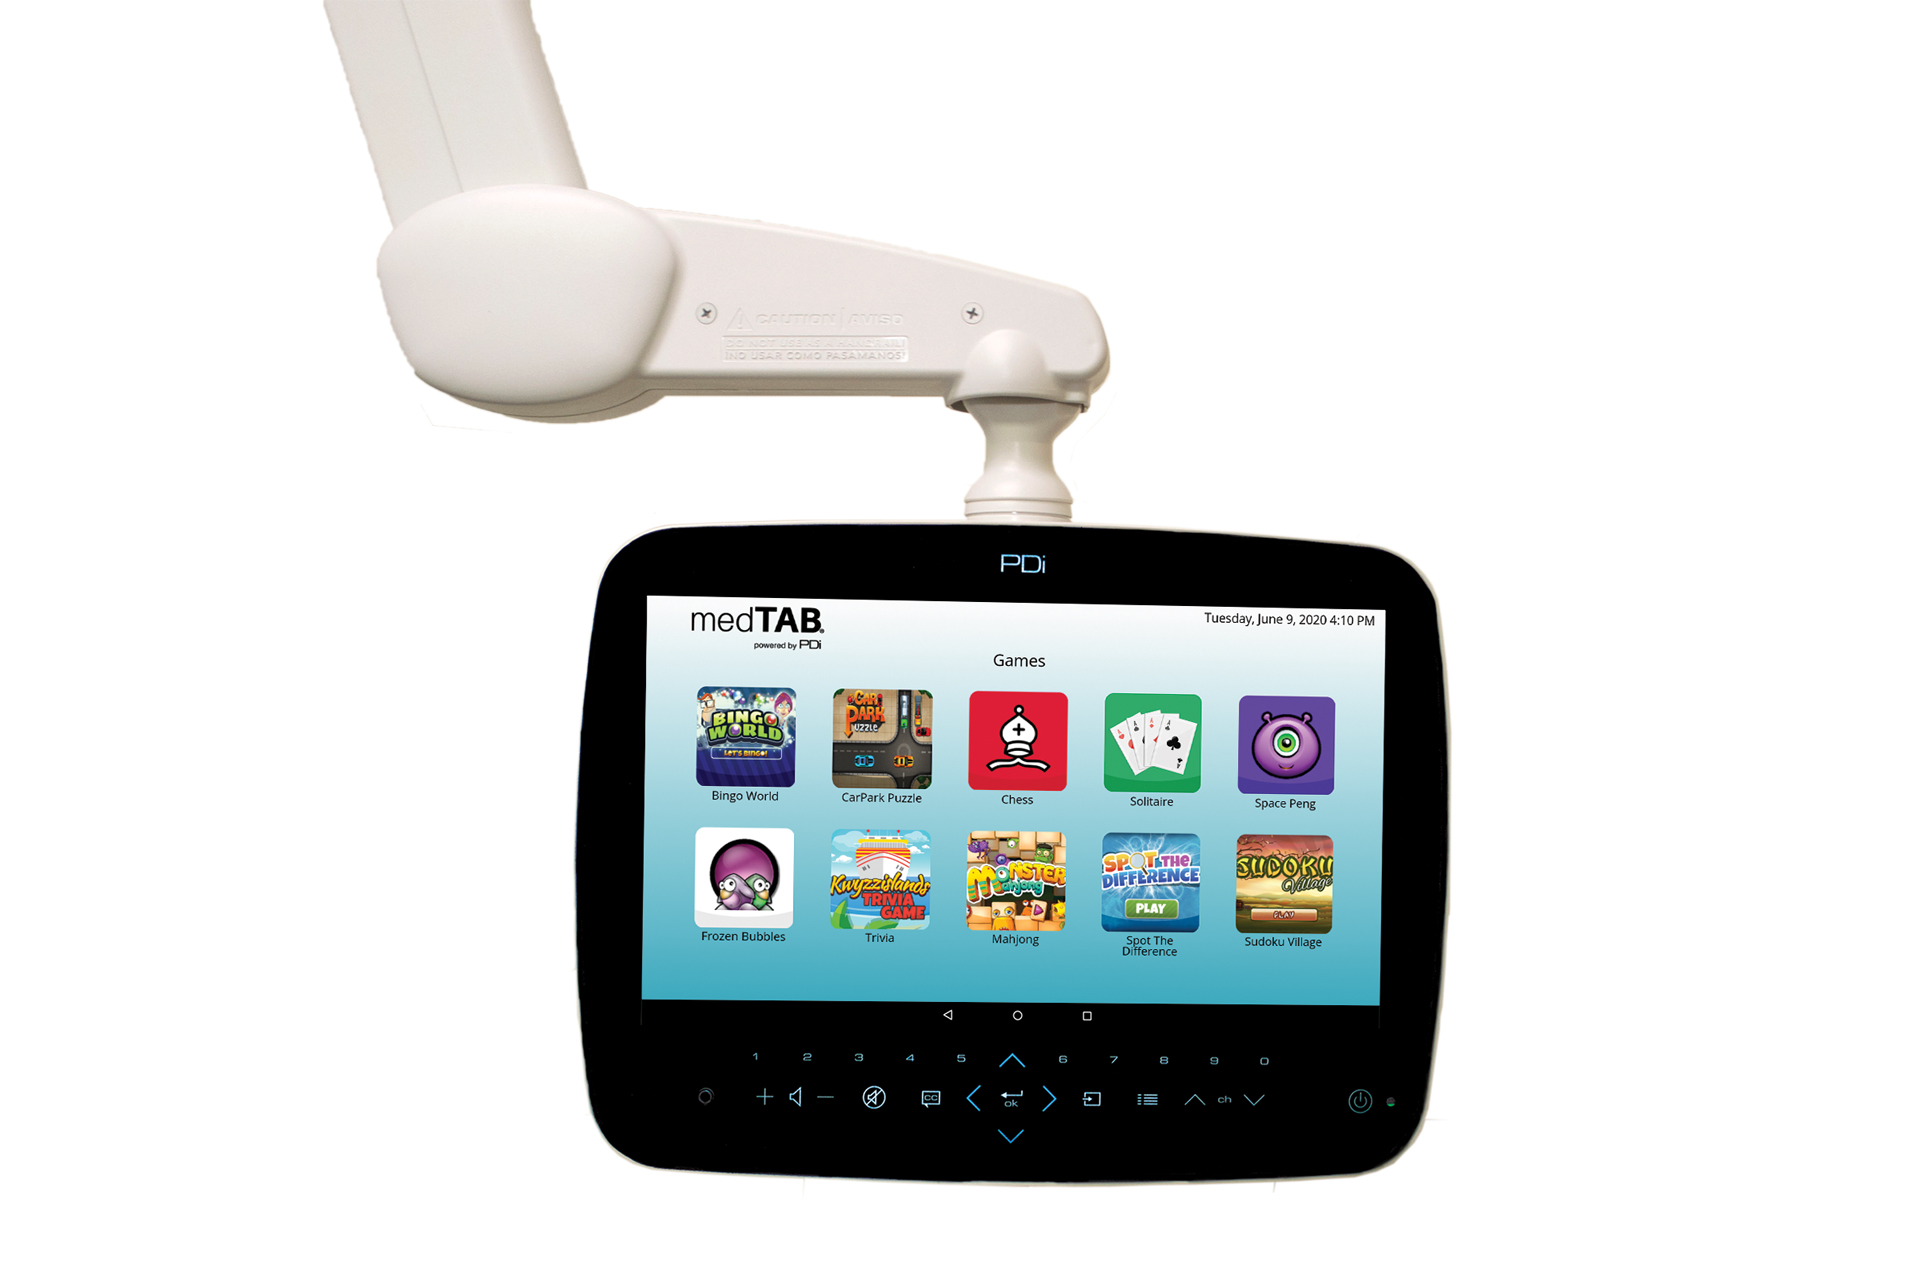 Product image of the medTAB14 healthcare television built by PDi Communication Systems, Inc. on the game screen